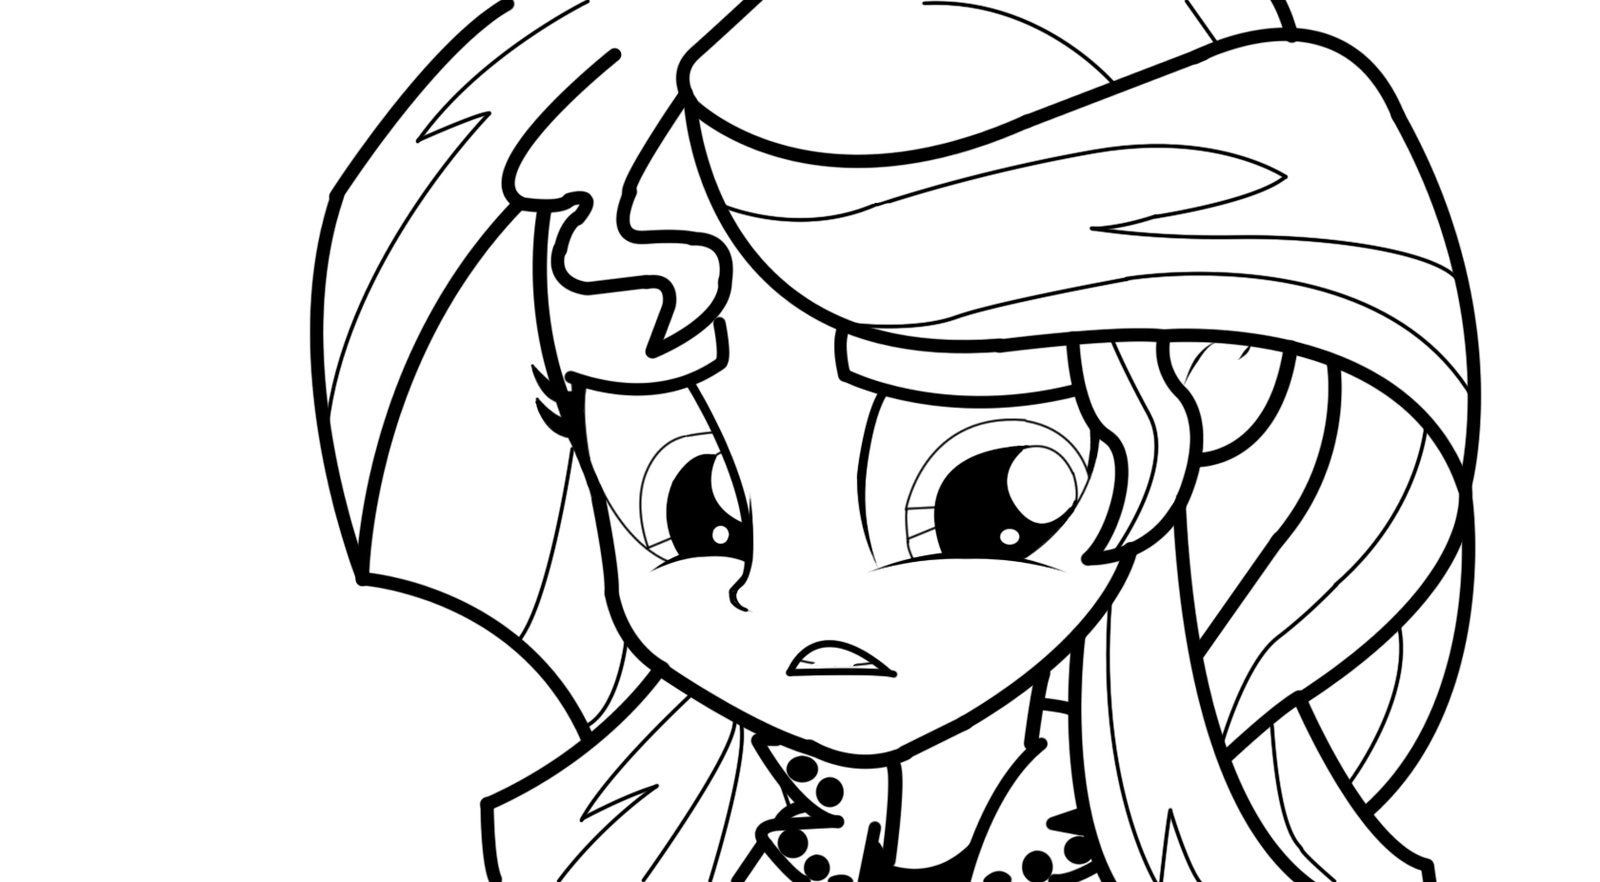 Equestria Girls Sunset Shimmer Coloring Pages
 My Little Pony Coloring Pages Sunset Shimmer at